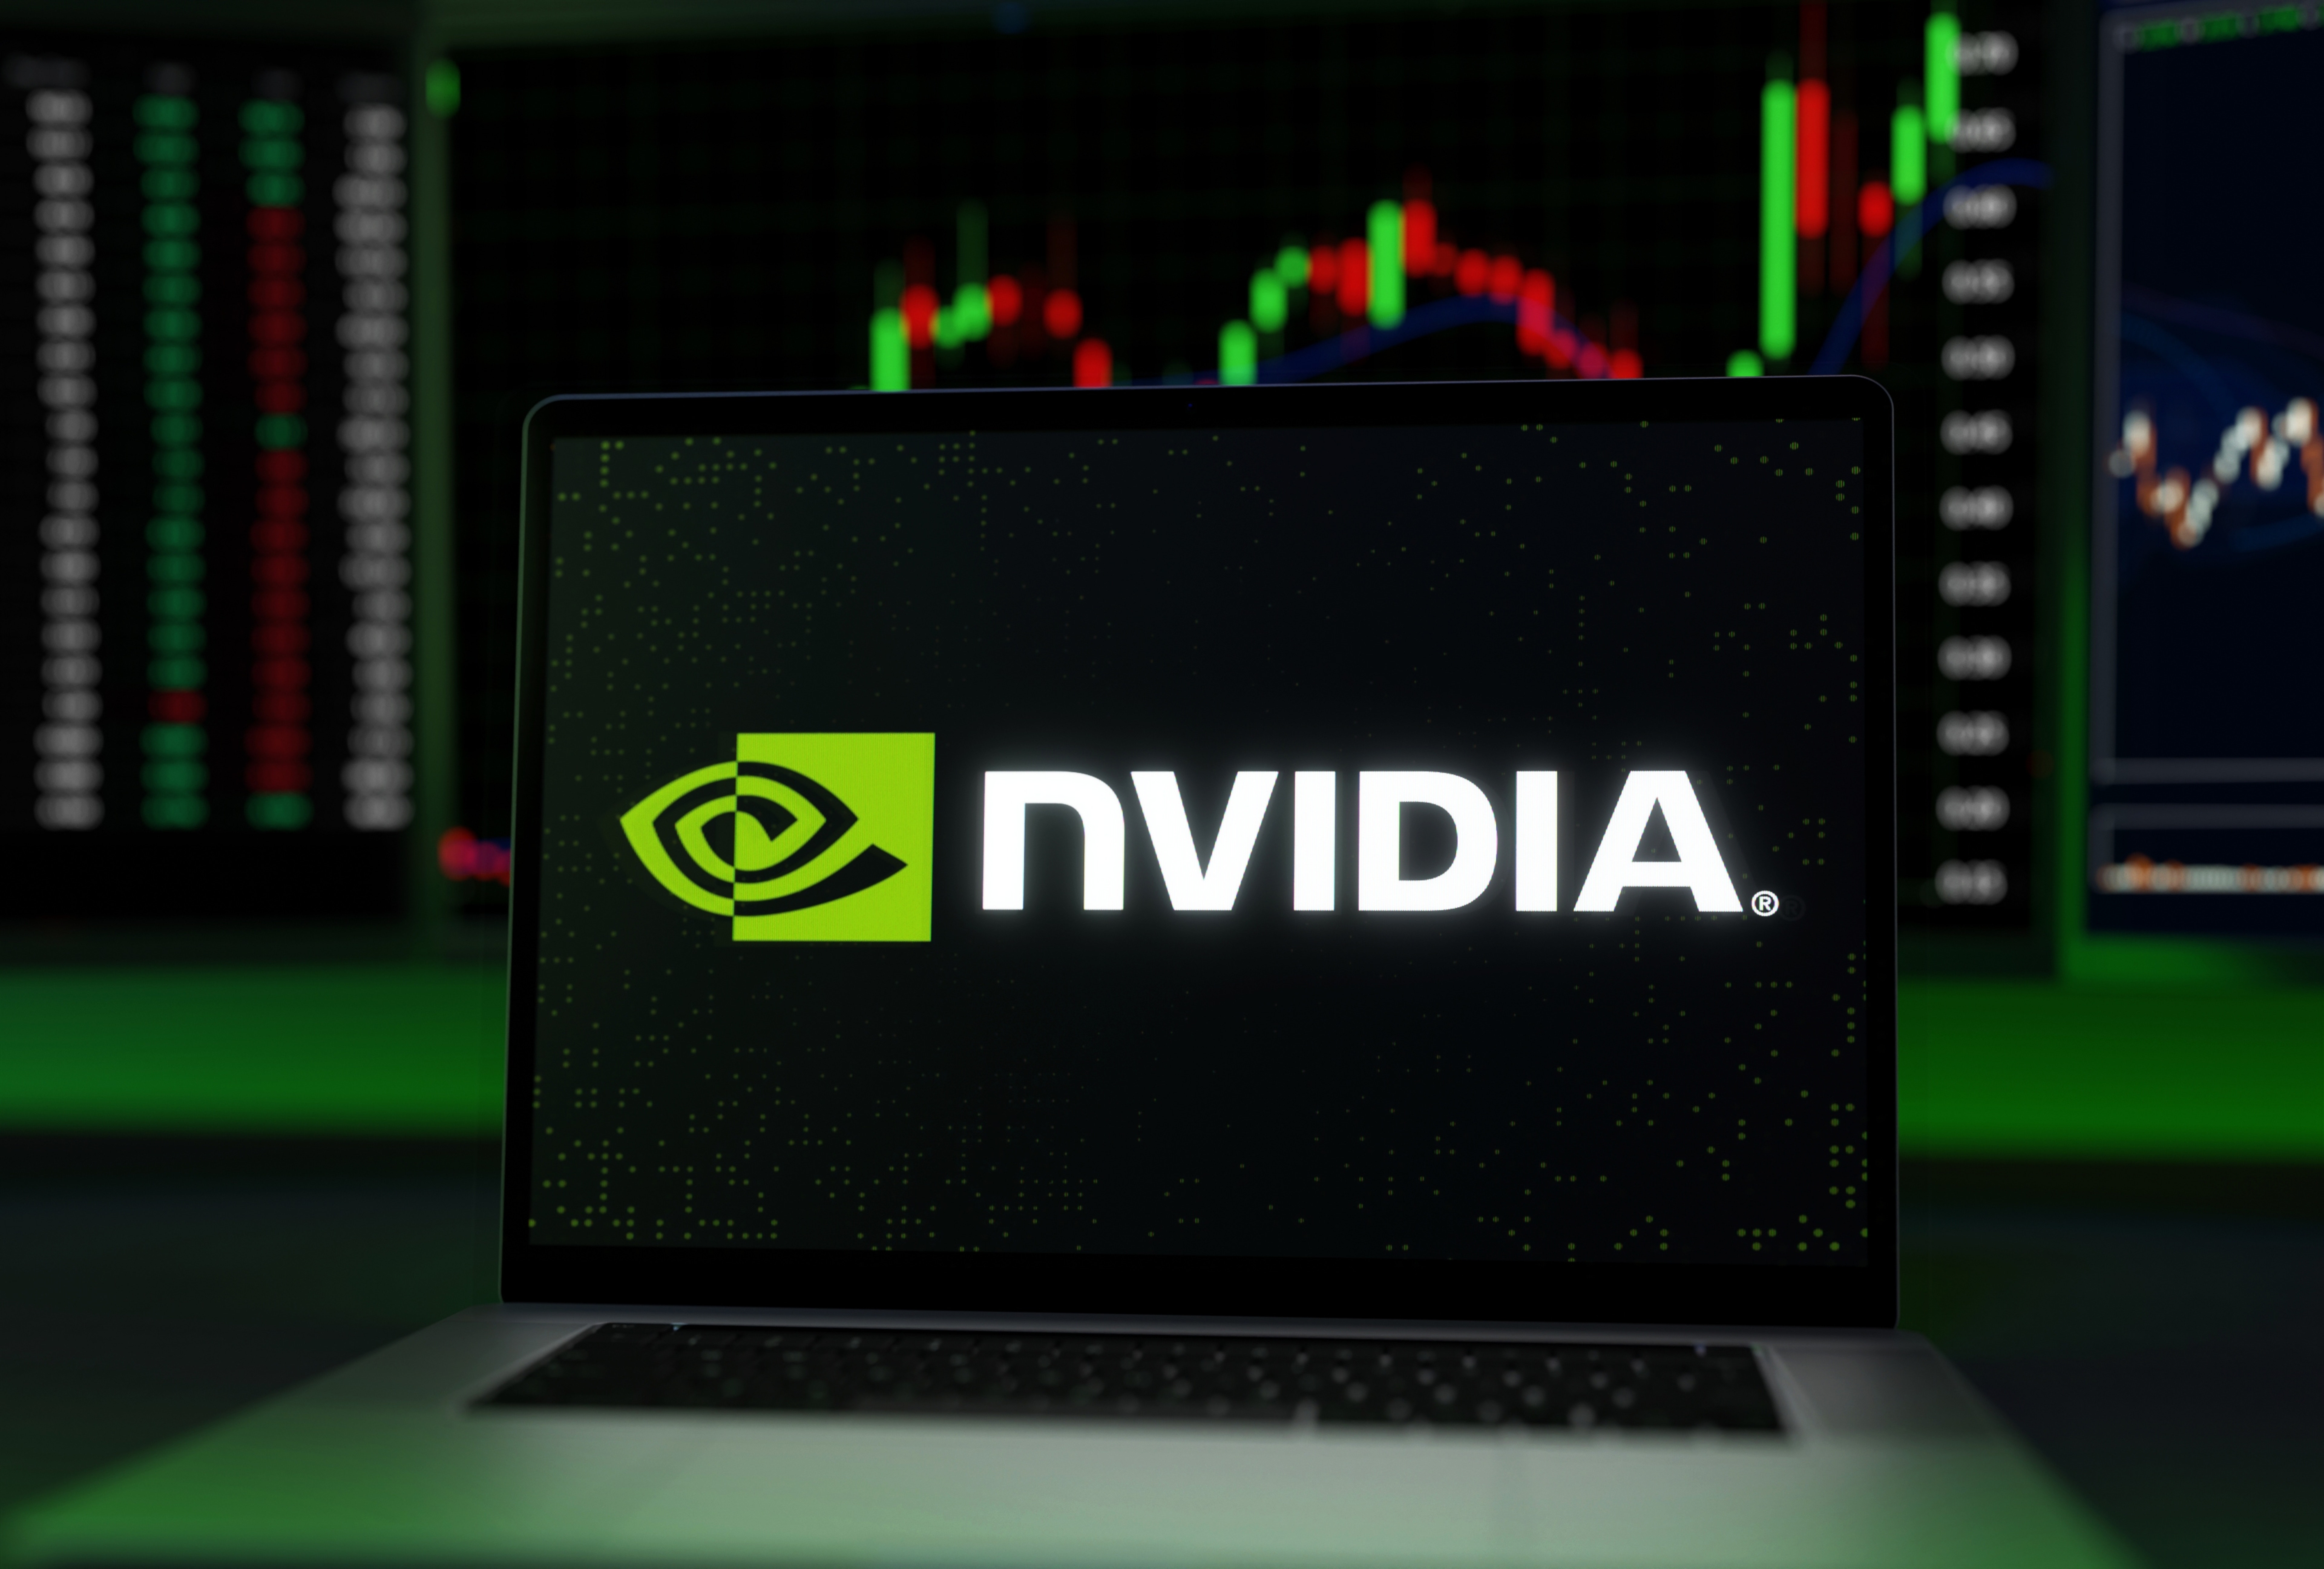 Cathie Wood Scoops Up Nvidia For 3rd Time Since Re-Entry With $3.8M Buy